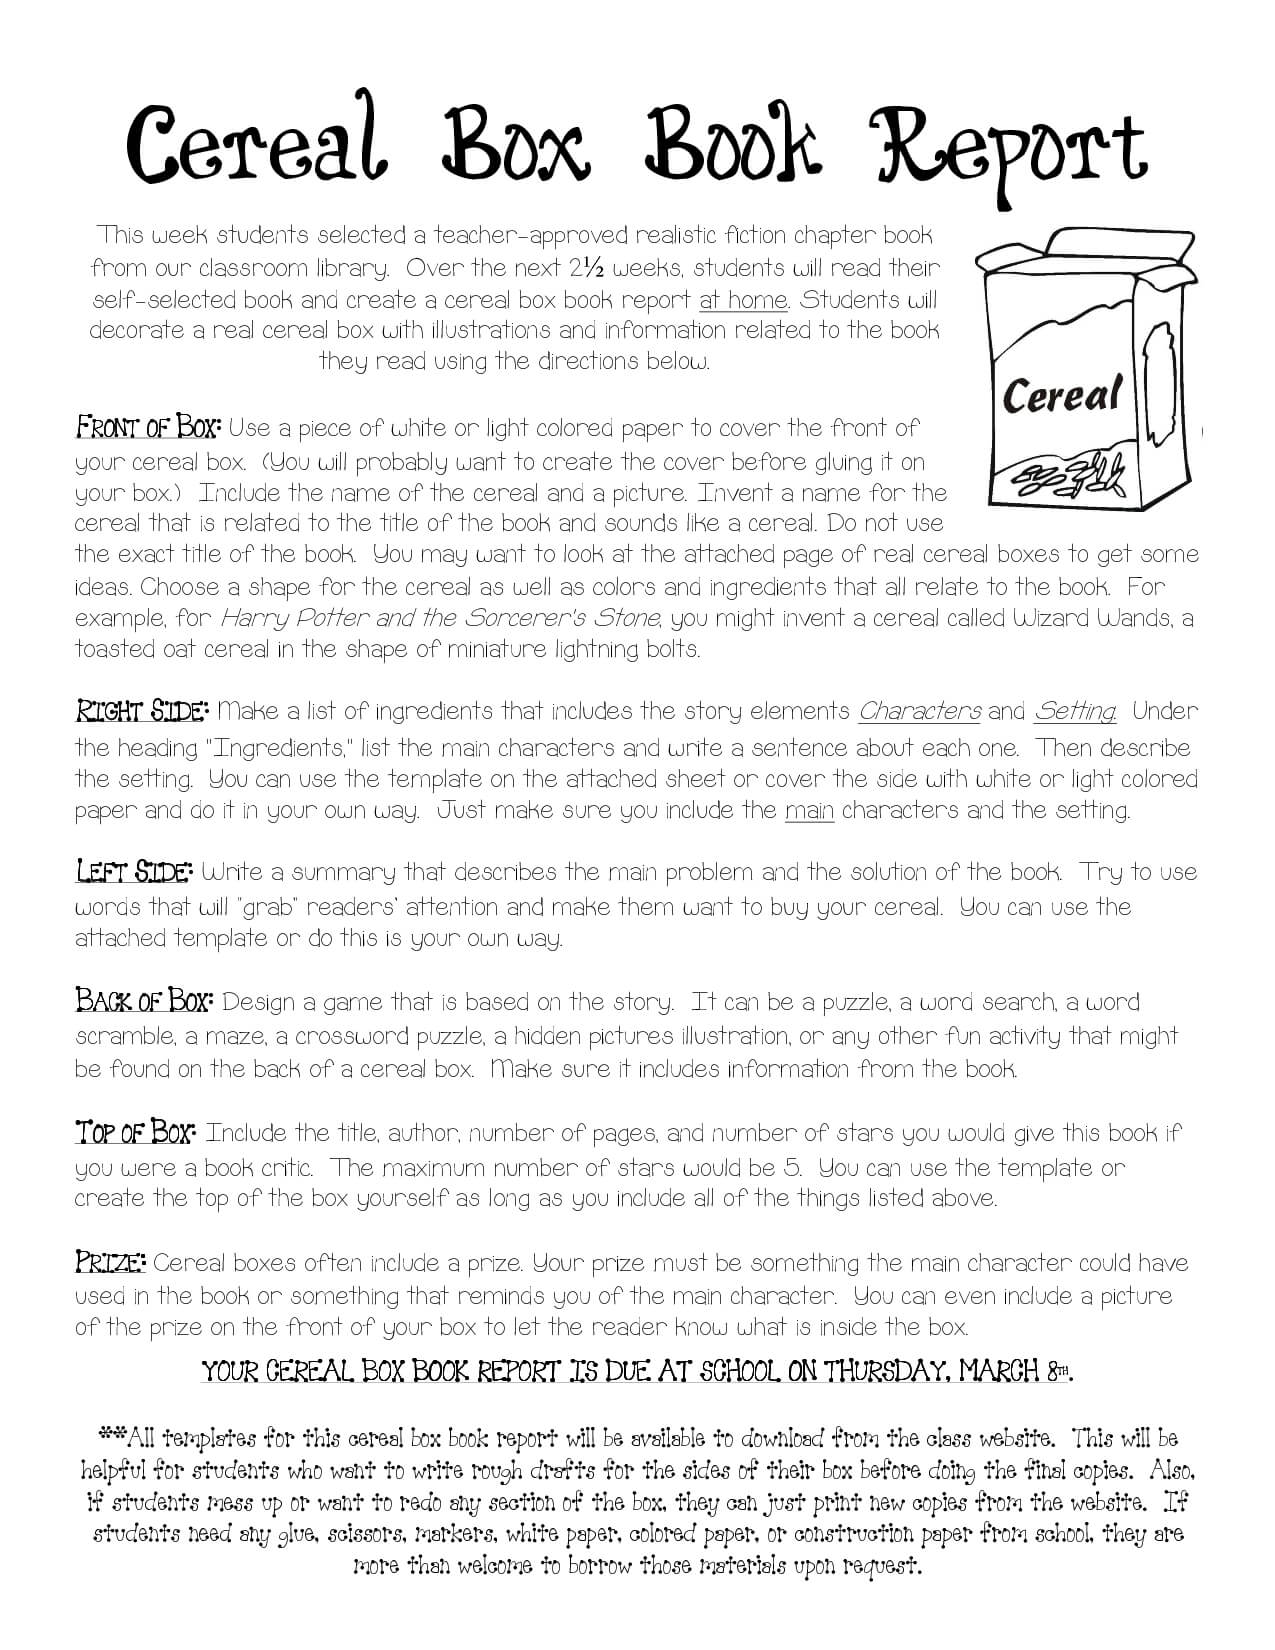 Cereal Box Book Report Instructions | Cereal Box Book Report With Cereal Box Book Report Template